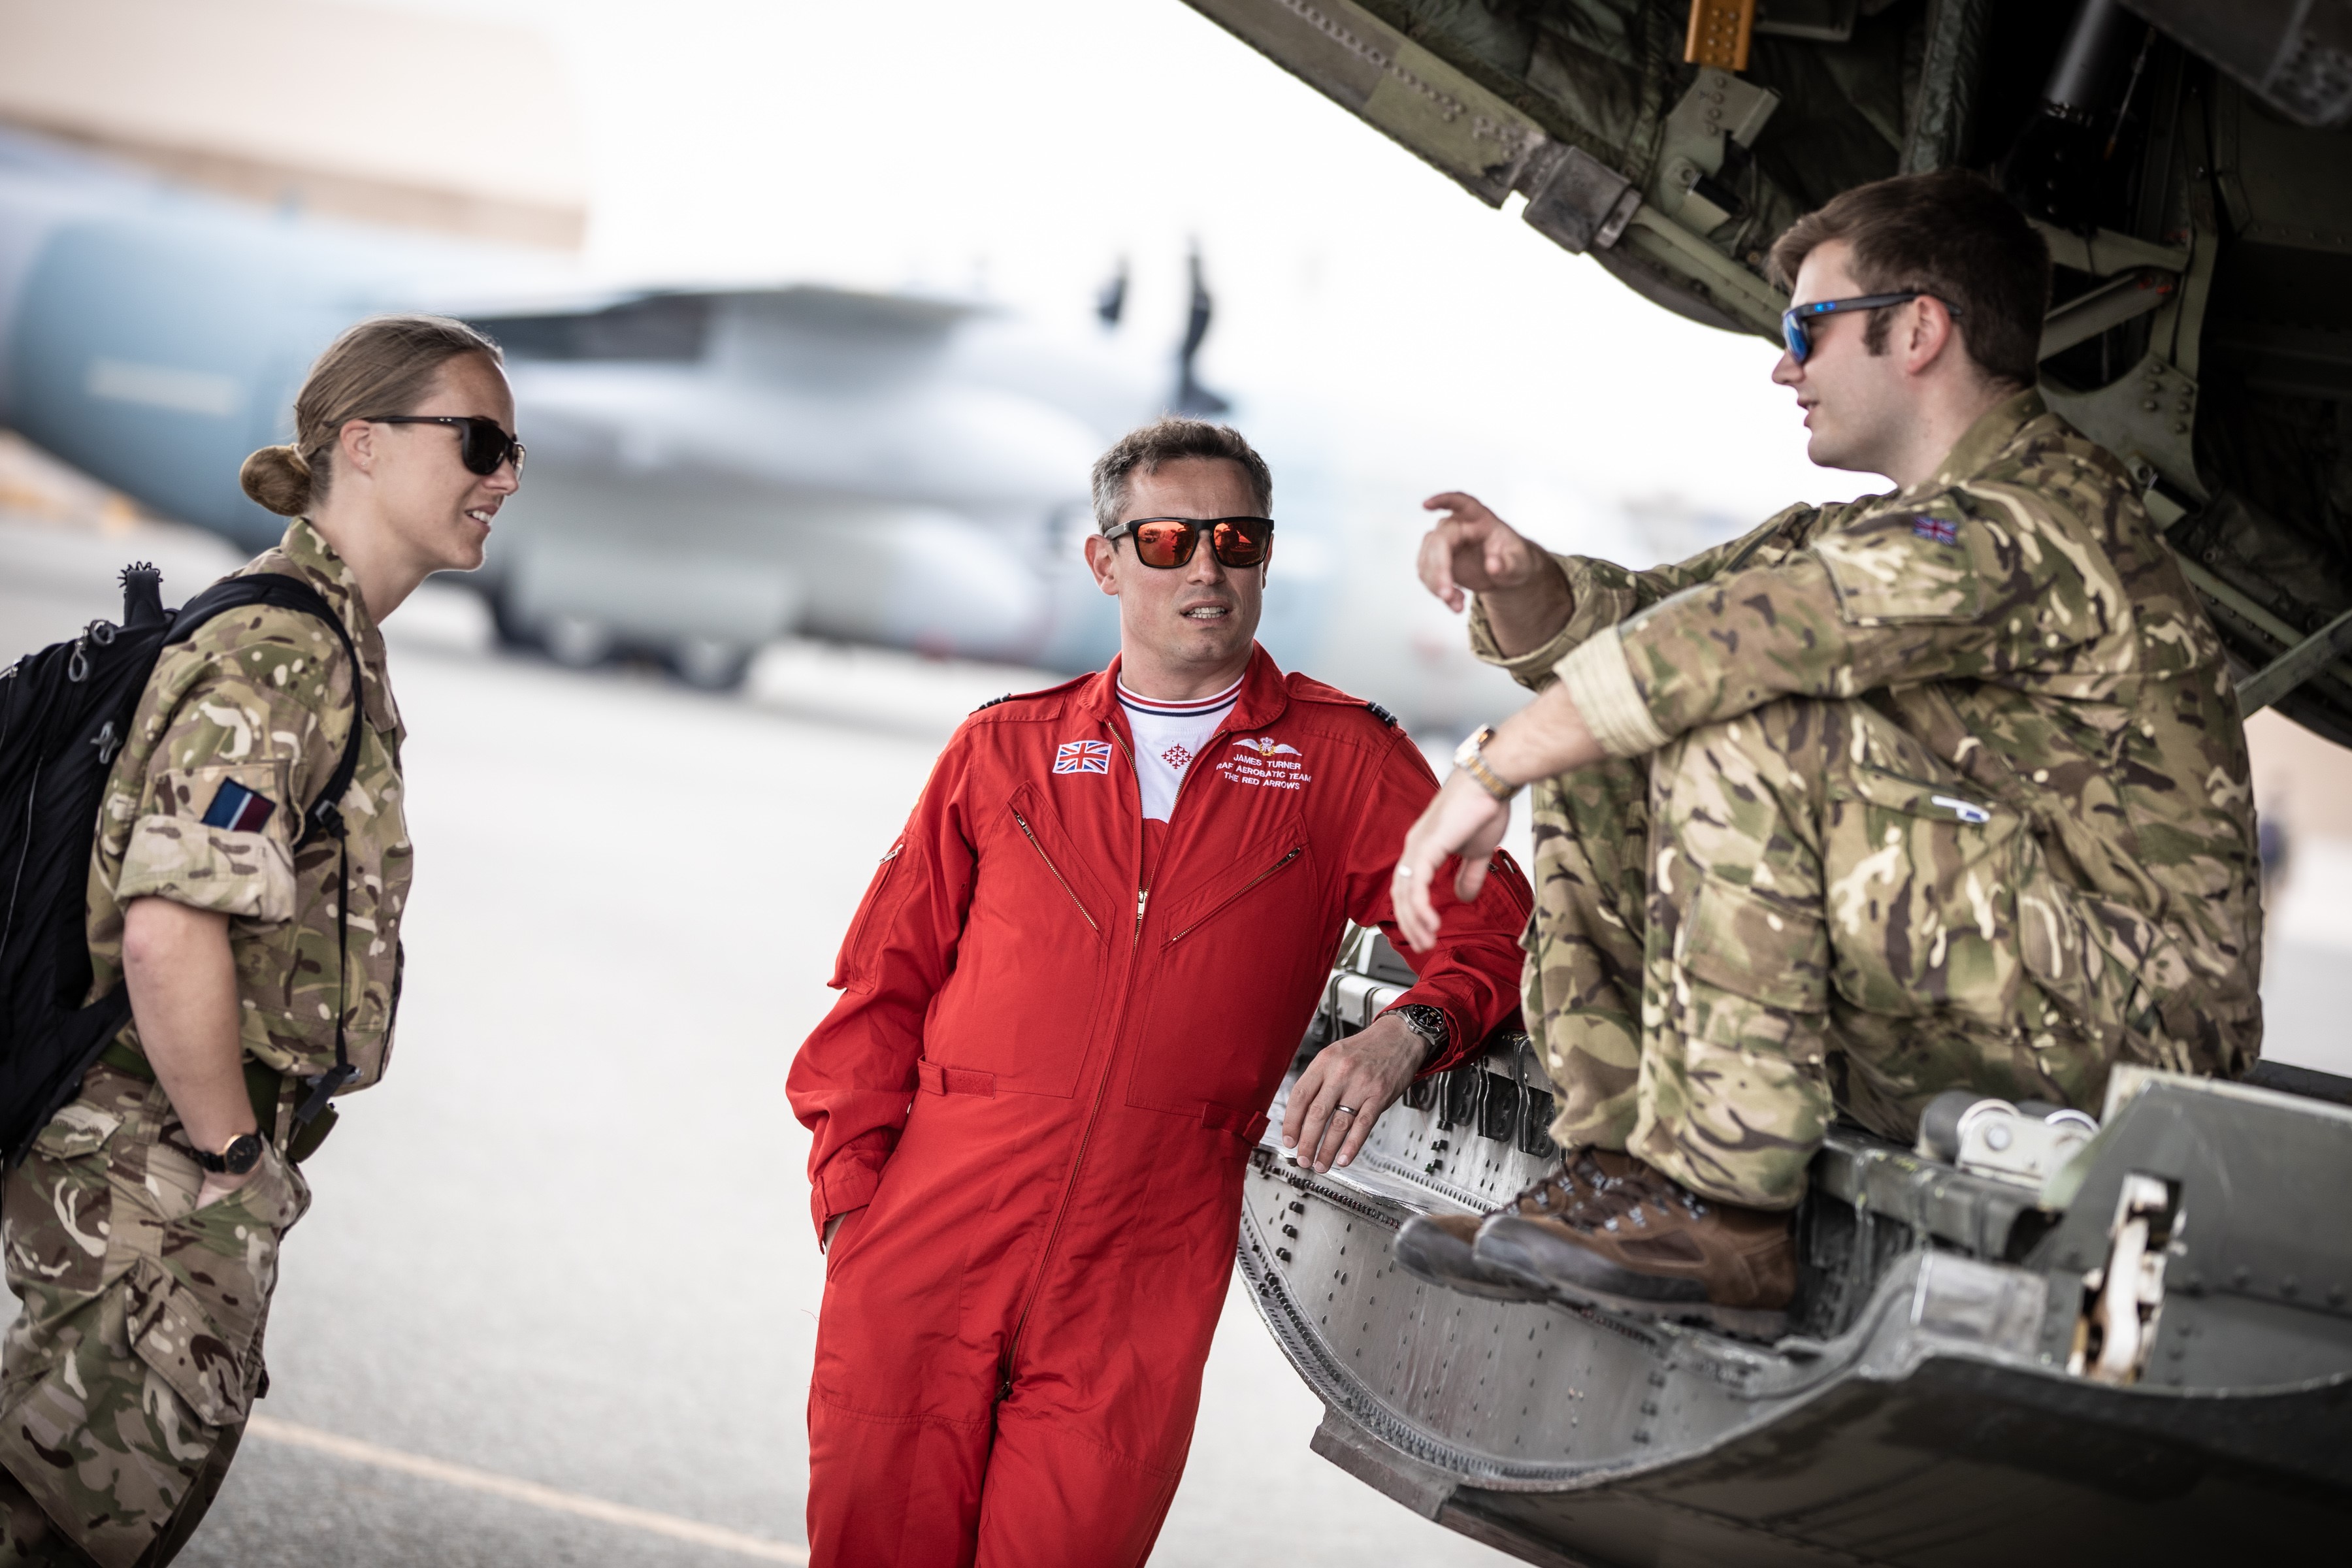 For 6 weeks, from 26 October to 5 December, a C-130J Hercules, crewed by Number 47 Squadron, provided support to the Red Arrows’ tour of the Middle East.